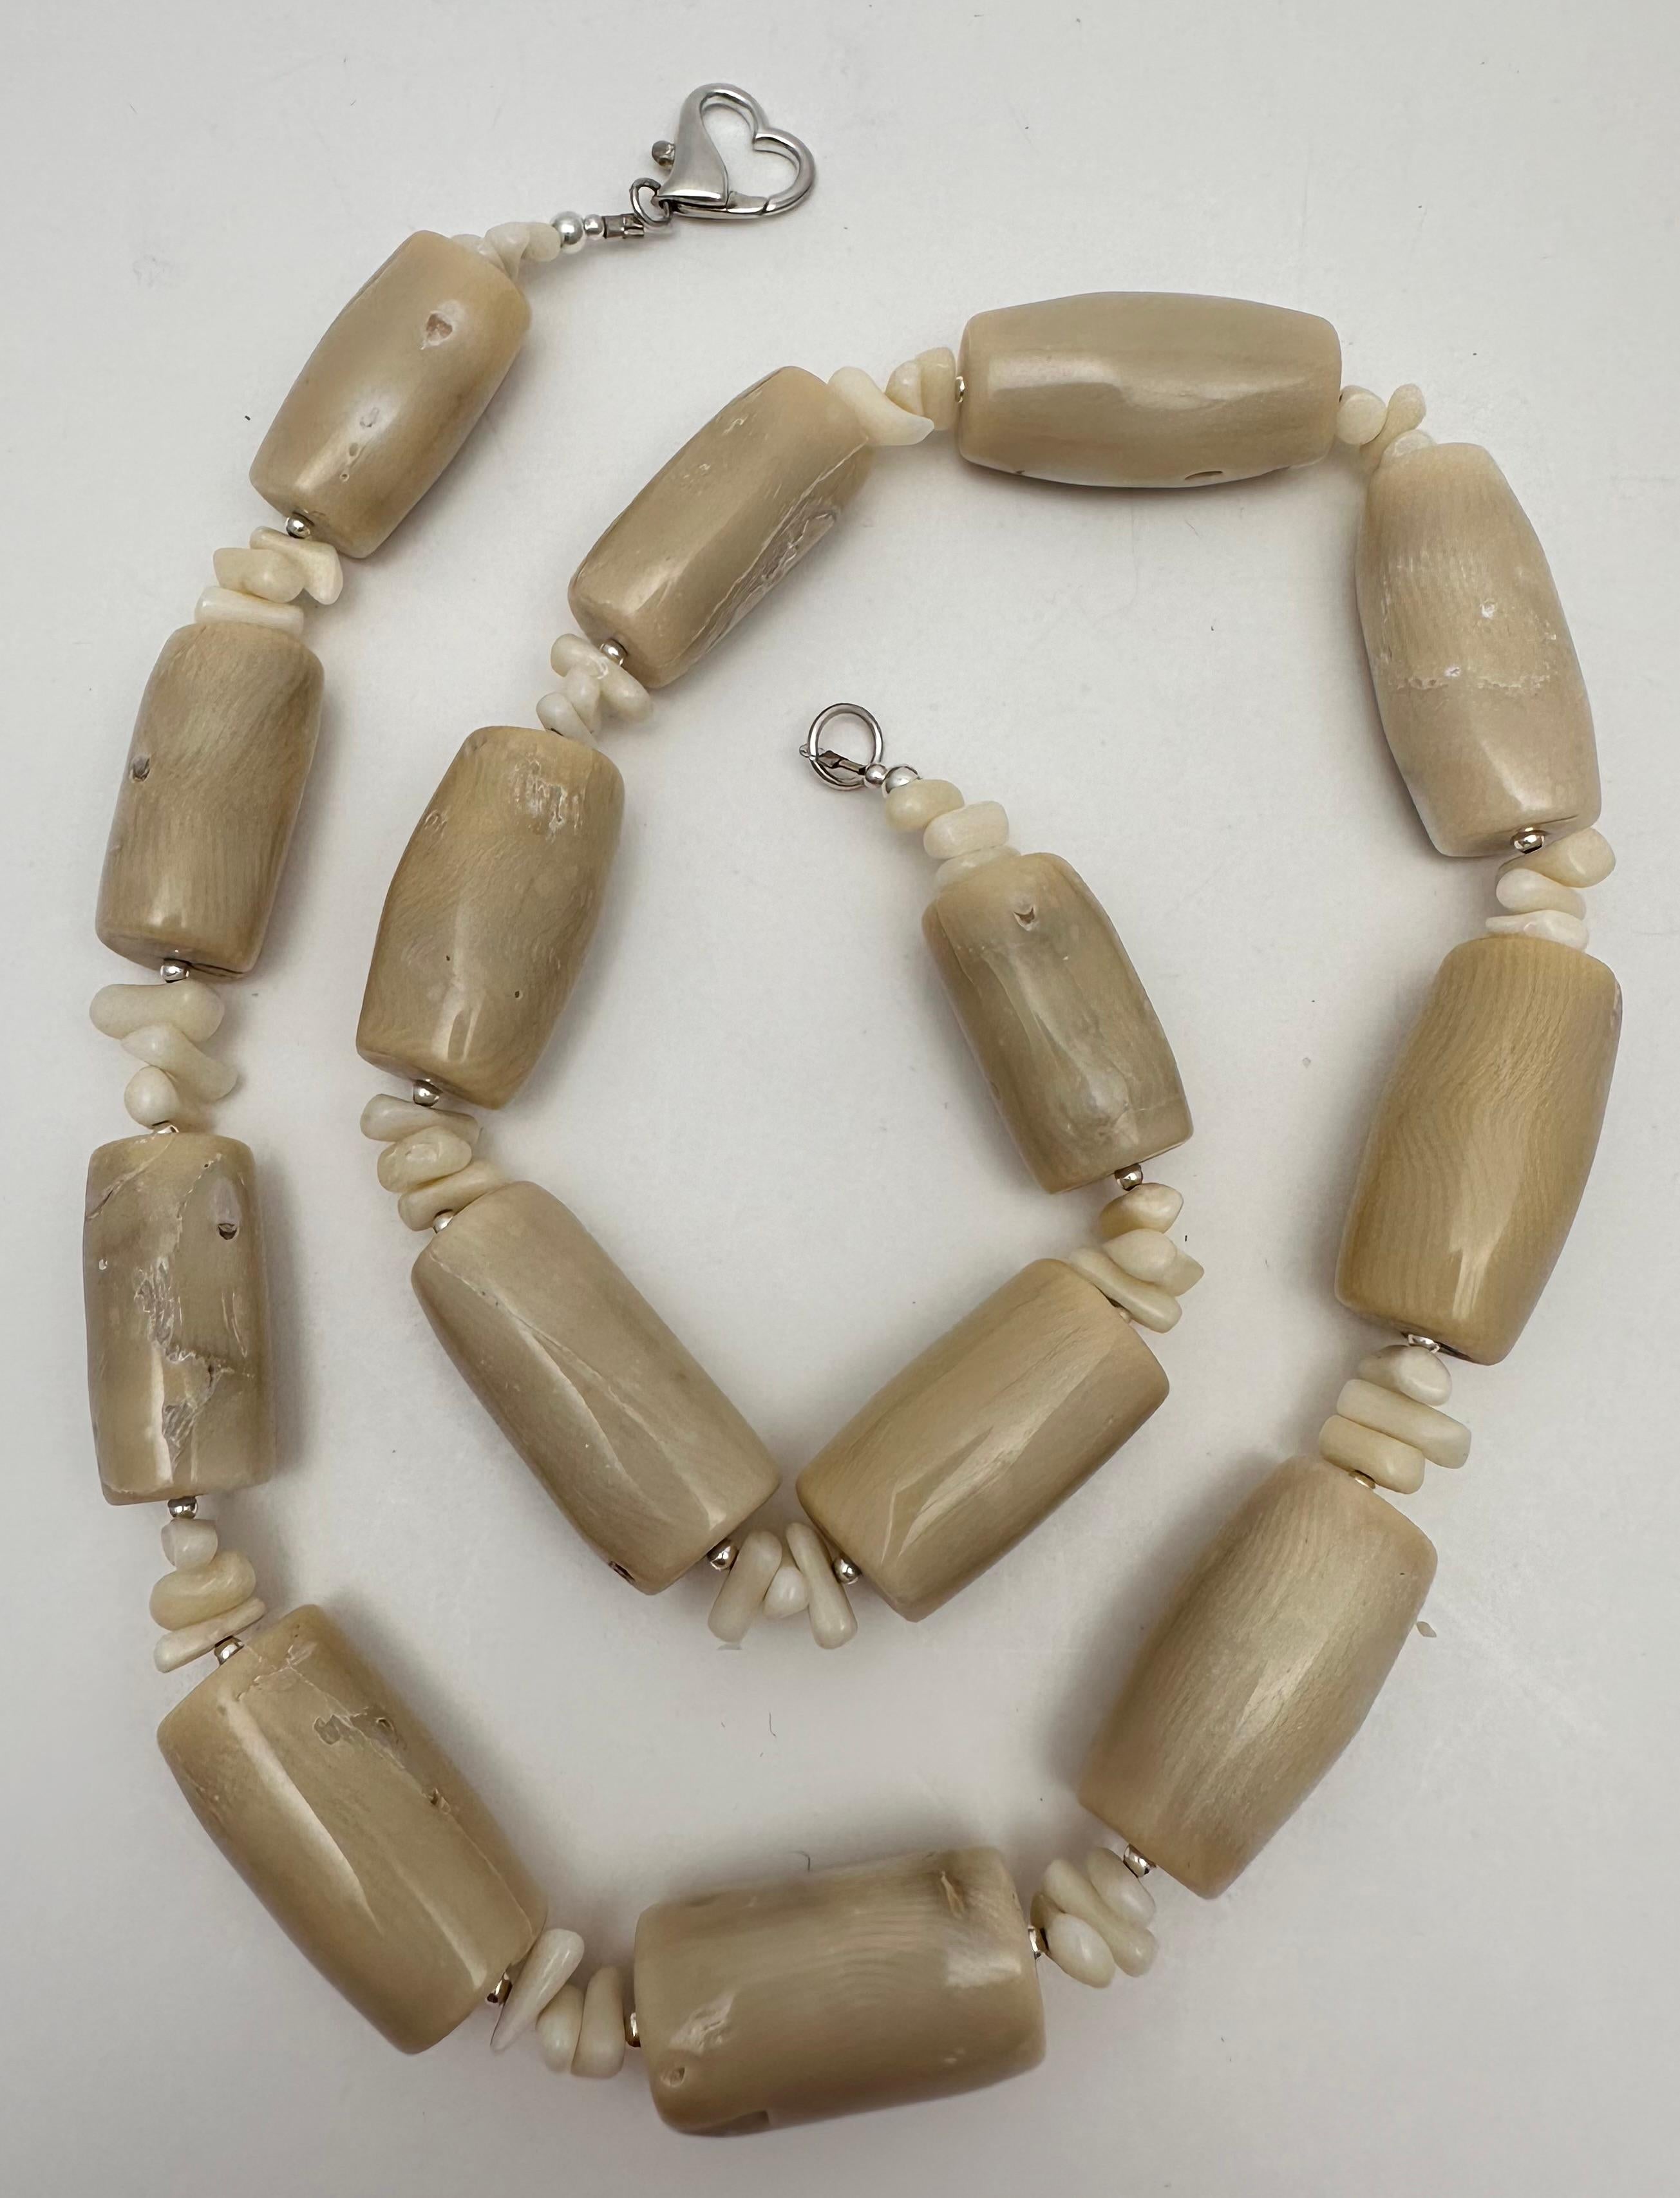 Upgrade your jewelry collection with this stunning Handmade Sterling Silver Beige Barrel Coral Beaded Necklace. The 26-inch necklace is beautifully crafted with a heart shape lobster clasp and features a barrel-shaped coral stone as the main